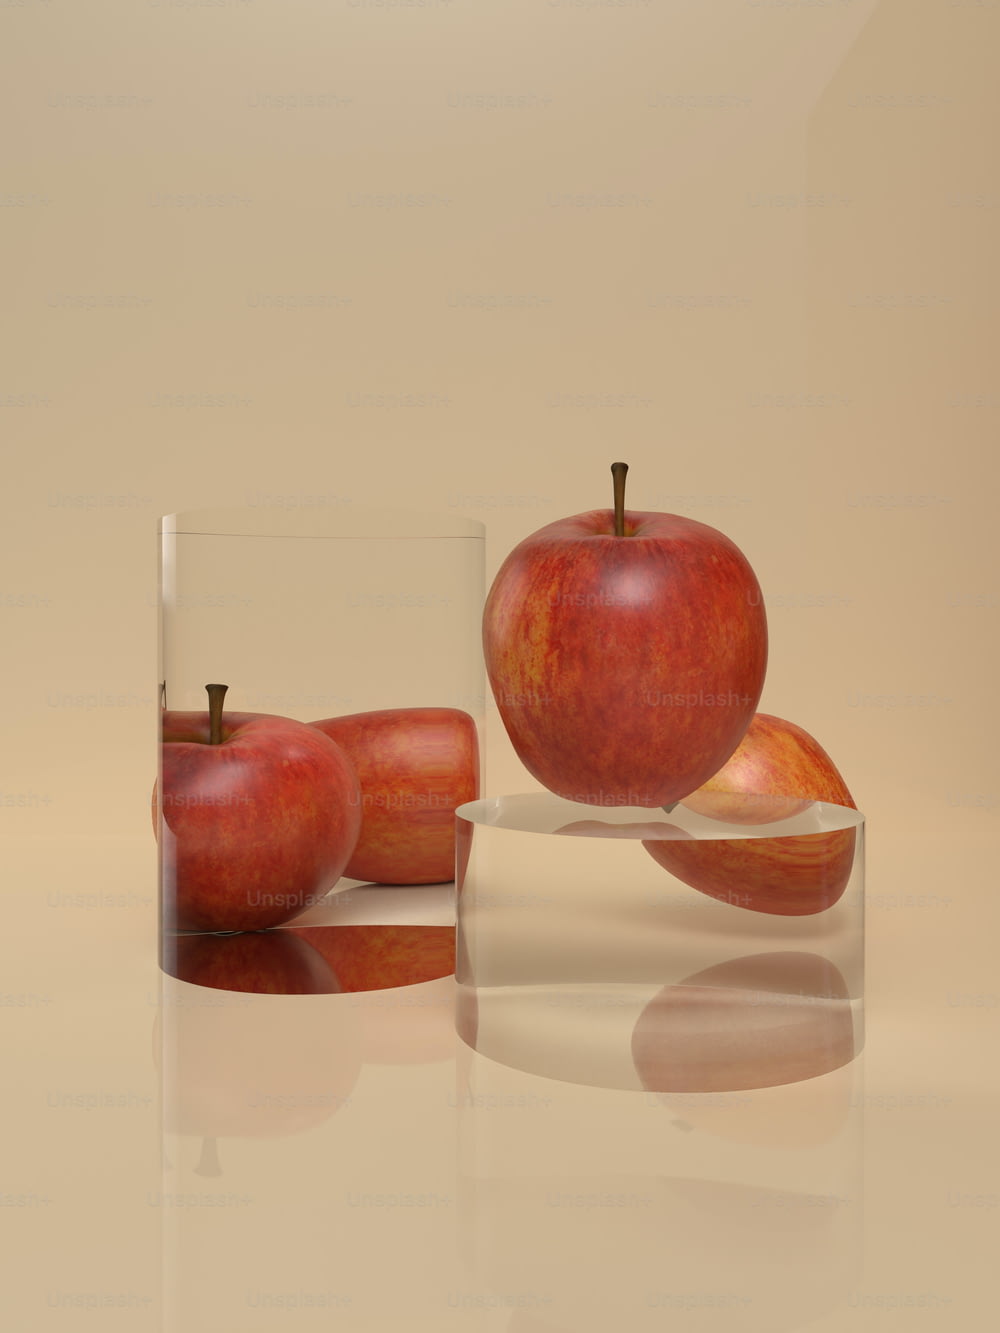 a glass with some apples inside of it